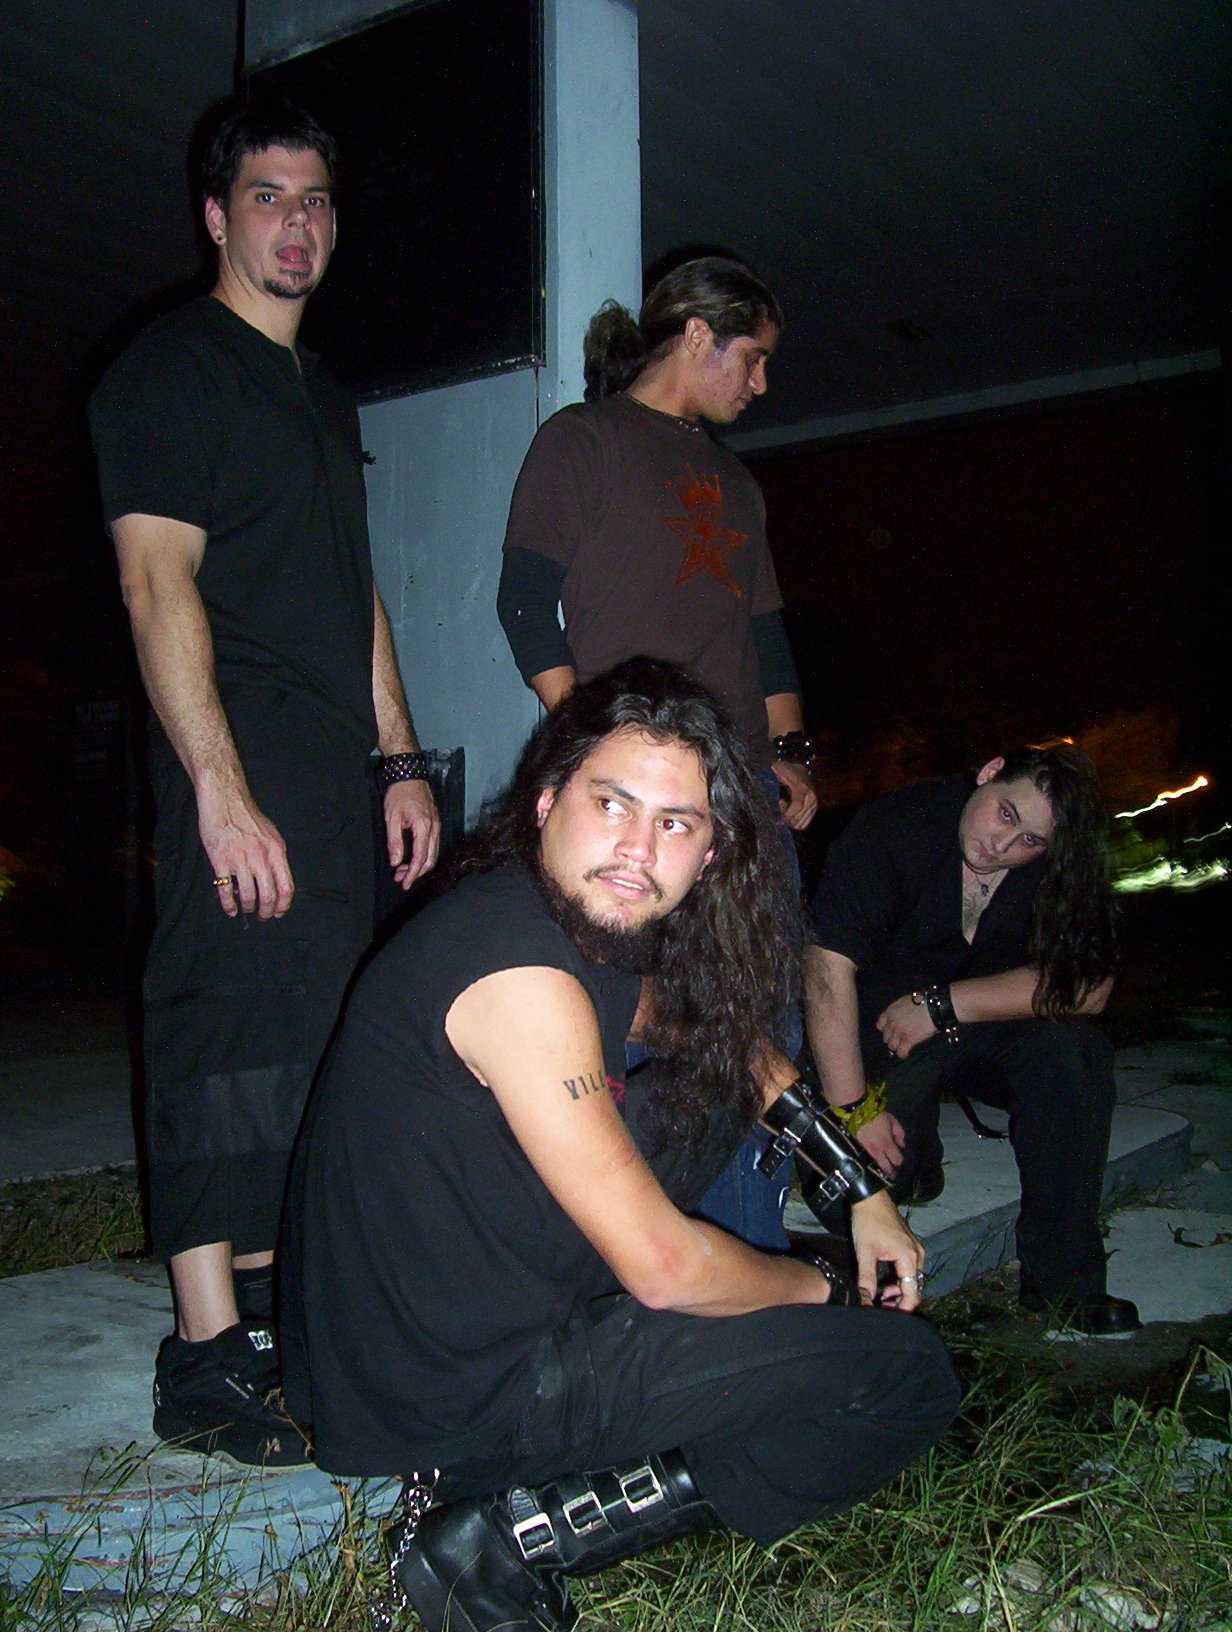 Osiris Rising - Promo Photo - Coral Springs, FL - October 2004 - Picture taken during the 'Mosquito Photo Shoot' - Photo by Ali Harris